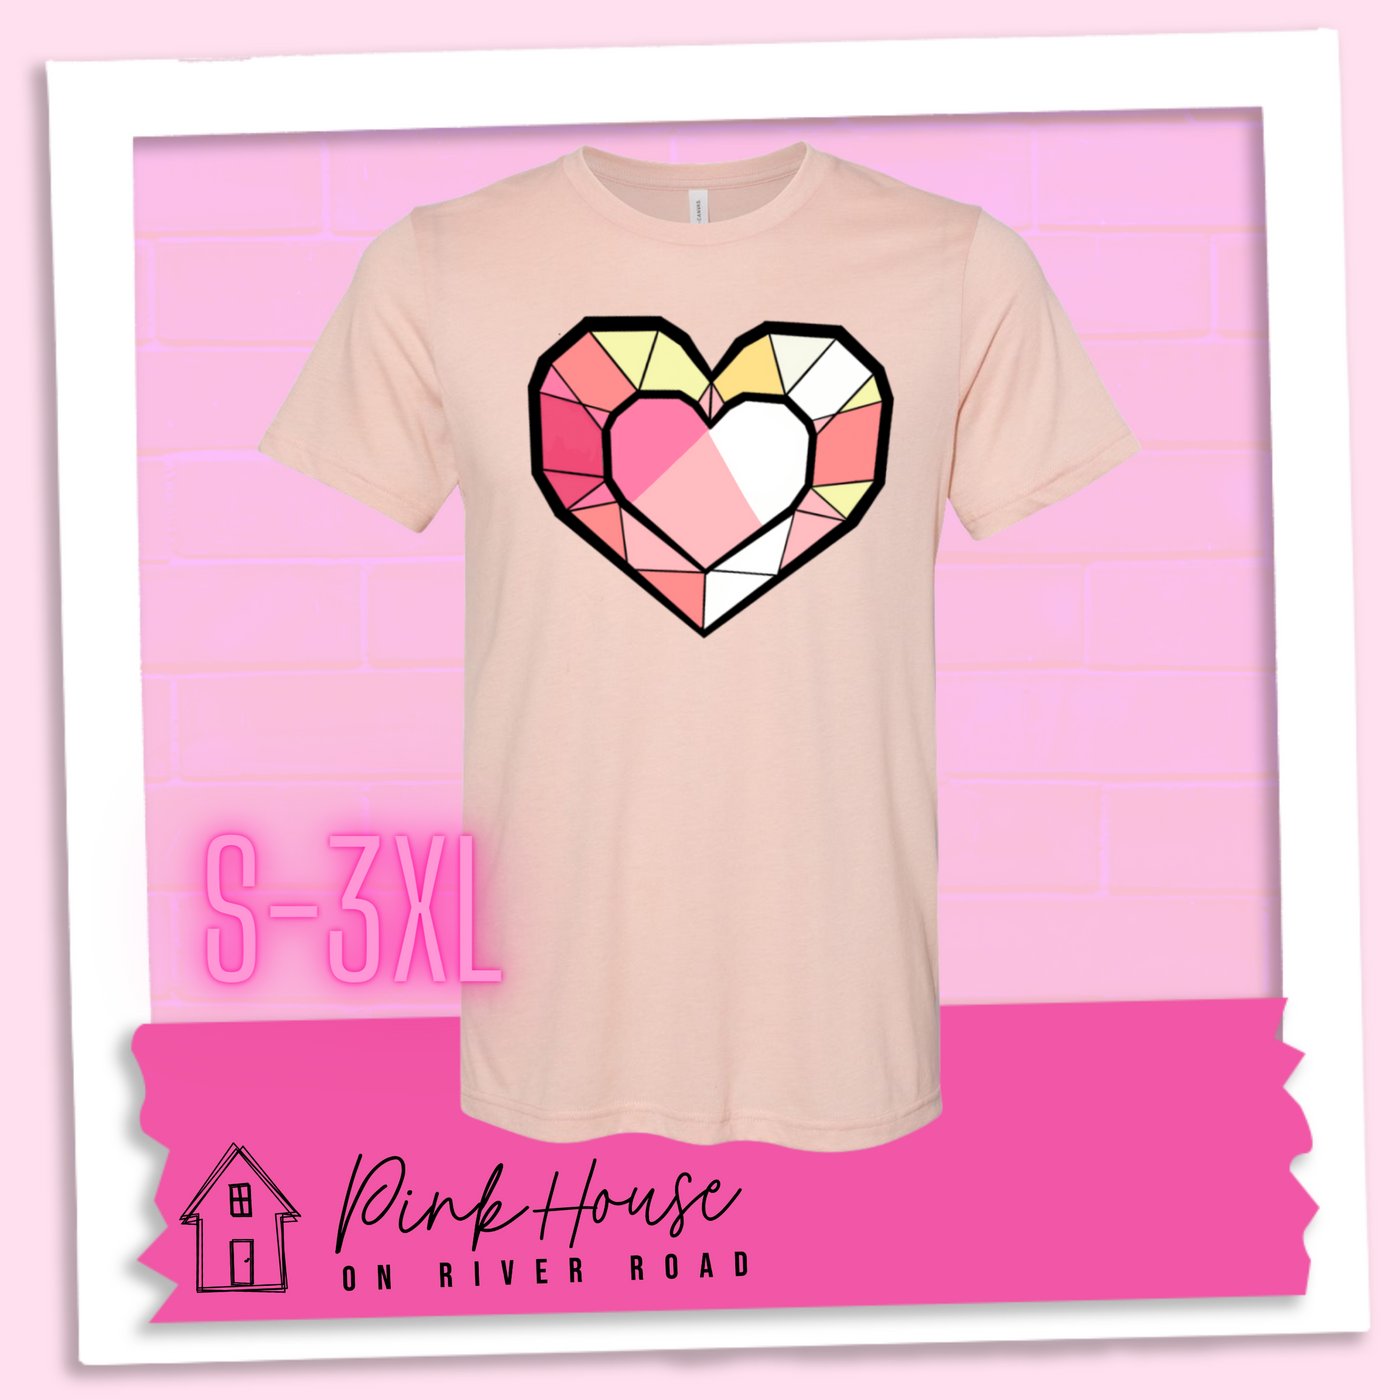 Heather Peach graphic tee. the graphic is of a geometric heart, it has black outlines to make it look like a gem with different shades of pinks, yellows, and white.